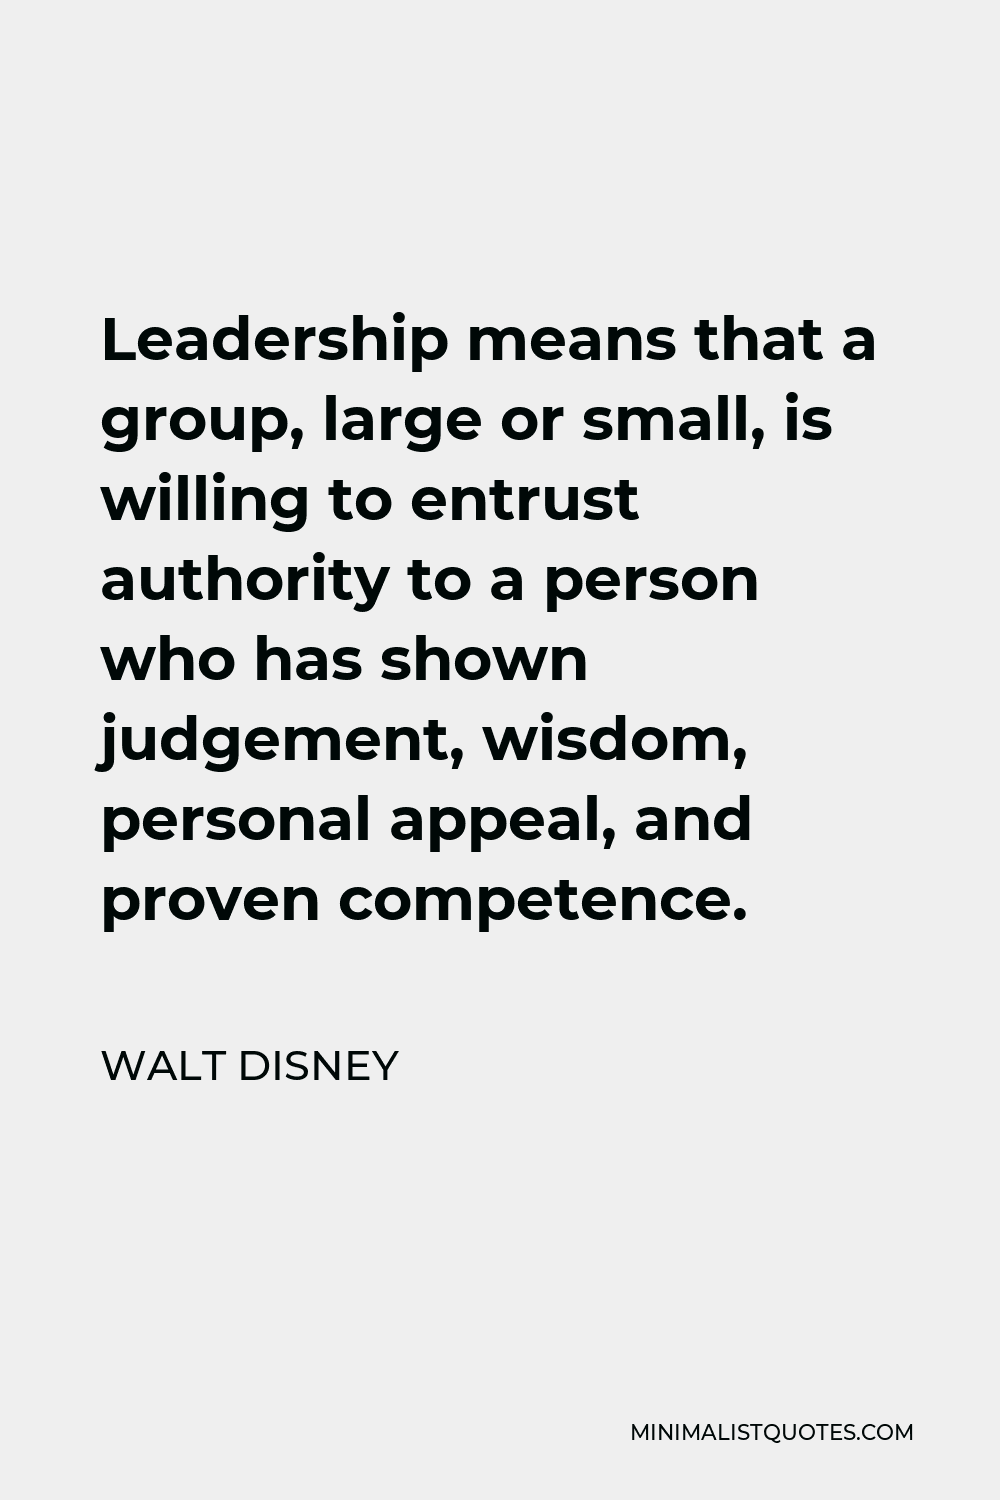 Walt Disney Quote - Leadership means that a group, large or small, is willing to entrust authority to a person who has shown judgement, wisdom, personal appeal, and proven competence.